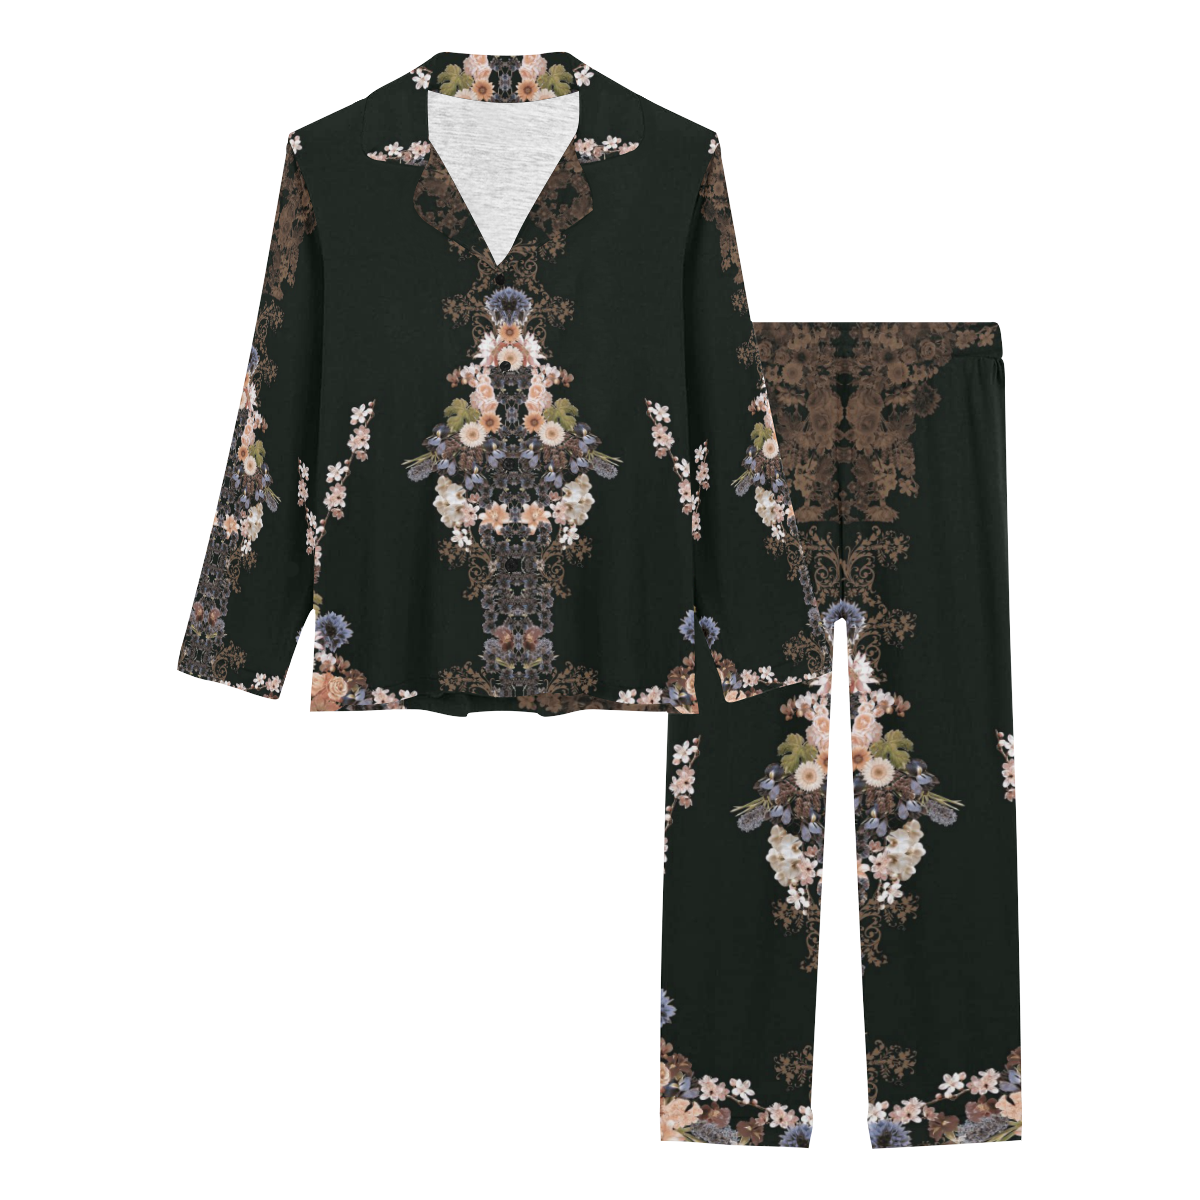 floral-black and peach Women's Long Pajama Set